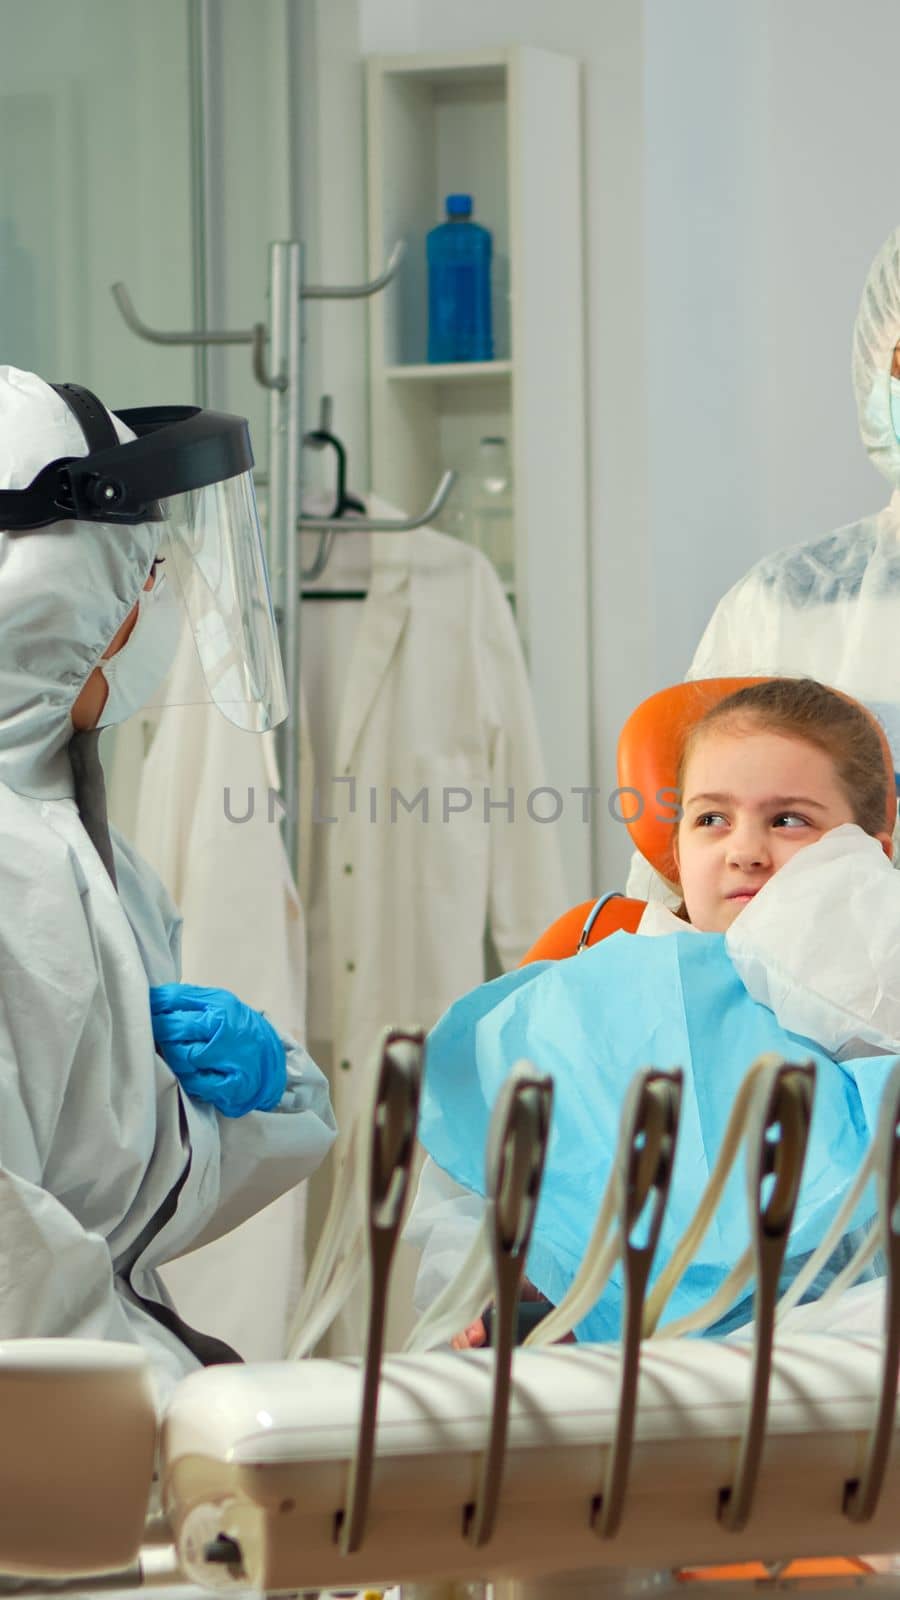 Child in protection suit showing dental problem to orthodontist wearing coverall during global pandemic. Concept of new normal dentist visit in coronavirus outbreak wearing face shield